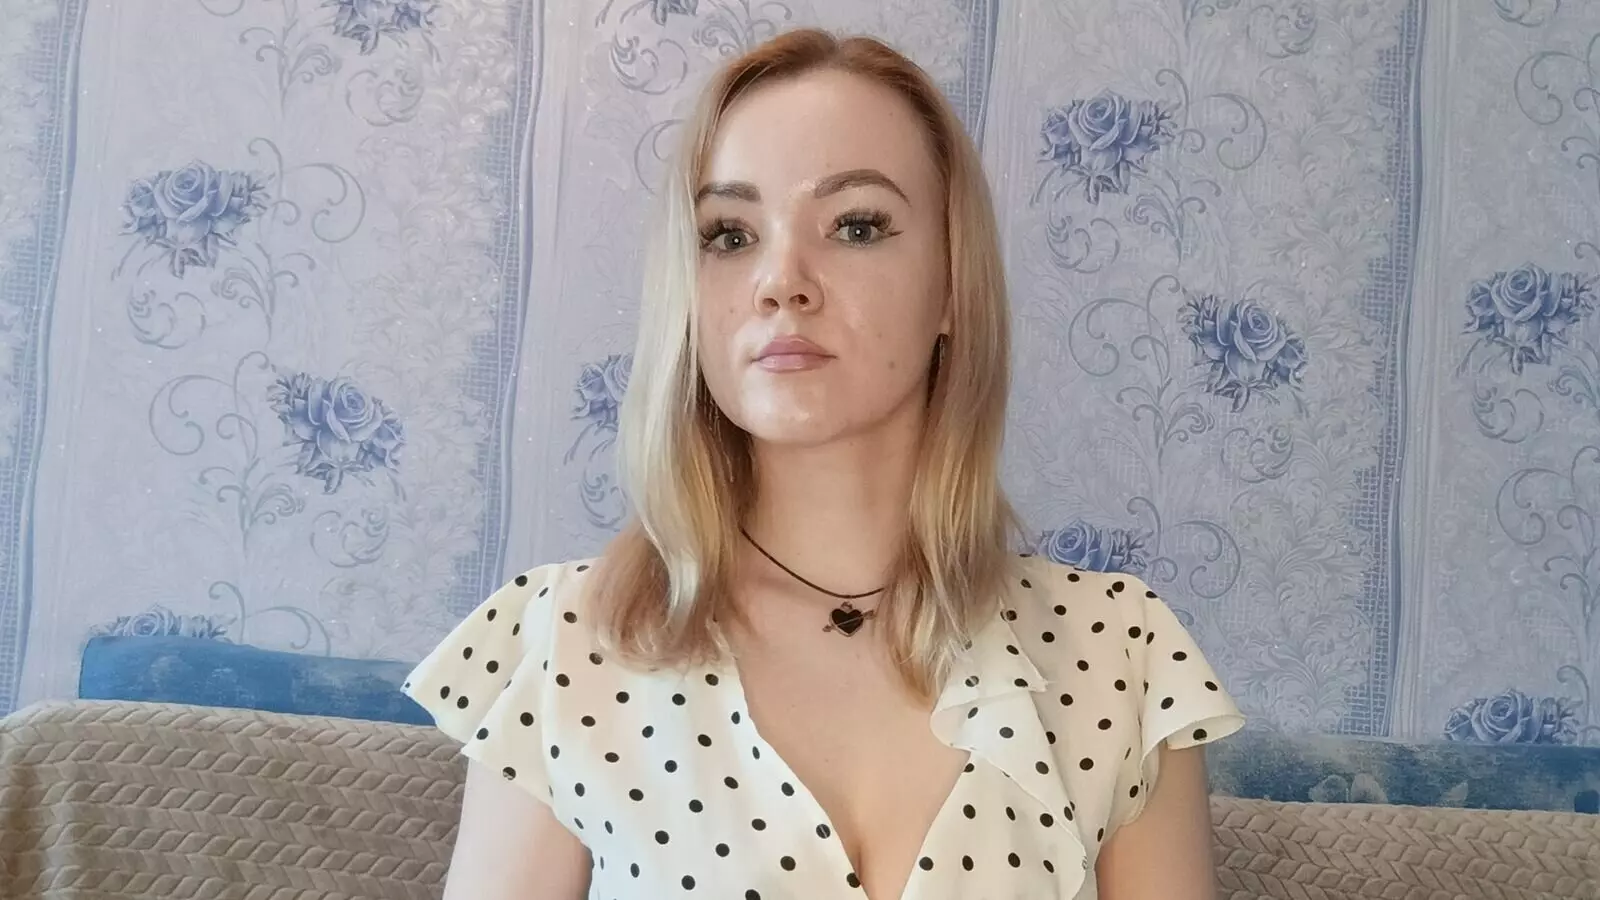  RELATED VIDEOS - WEBCAM KatieCorol STRIPS AND MASTURBATES